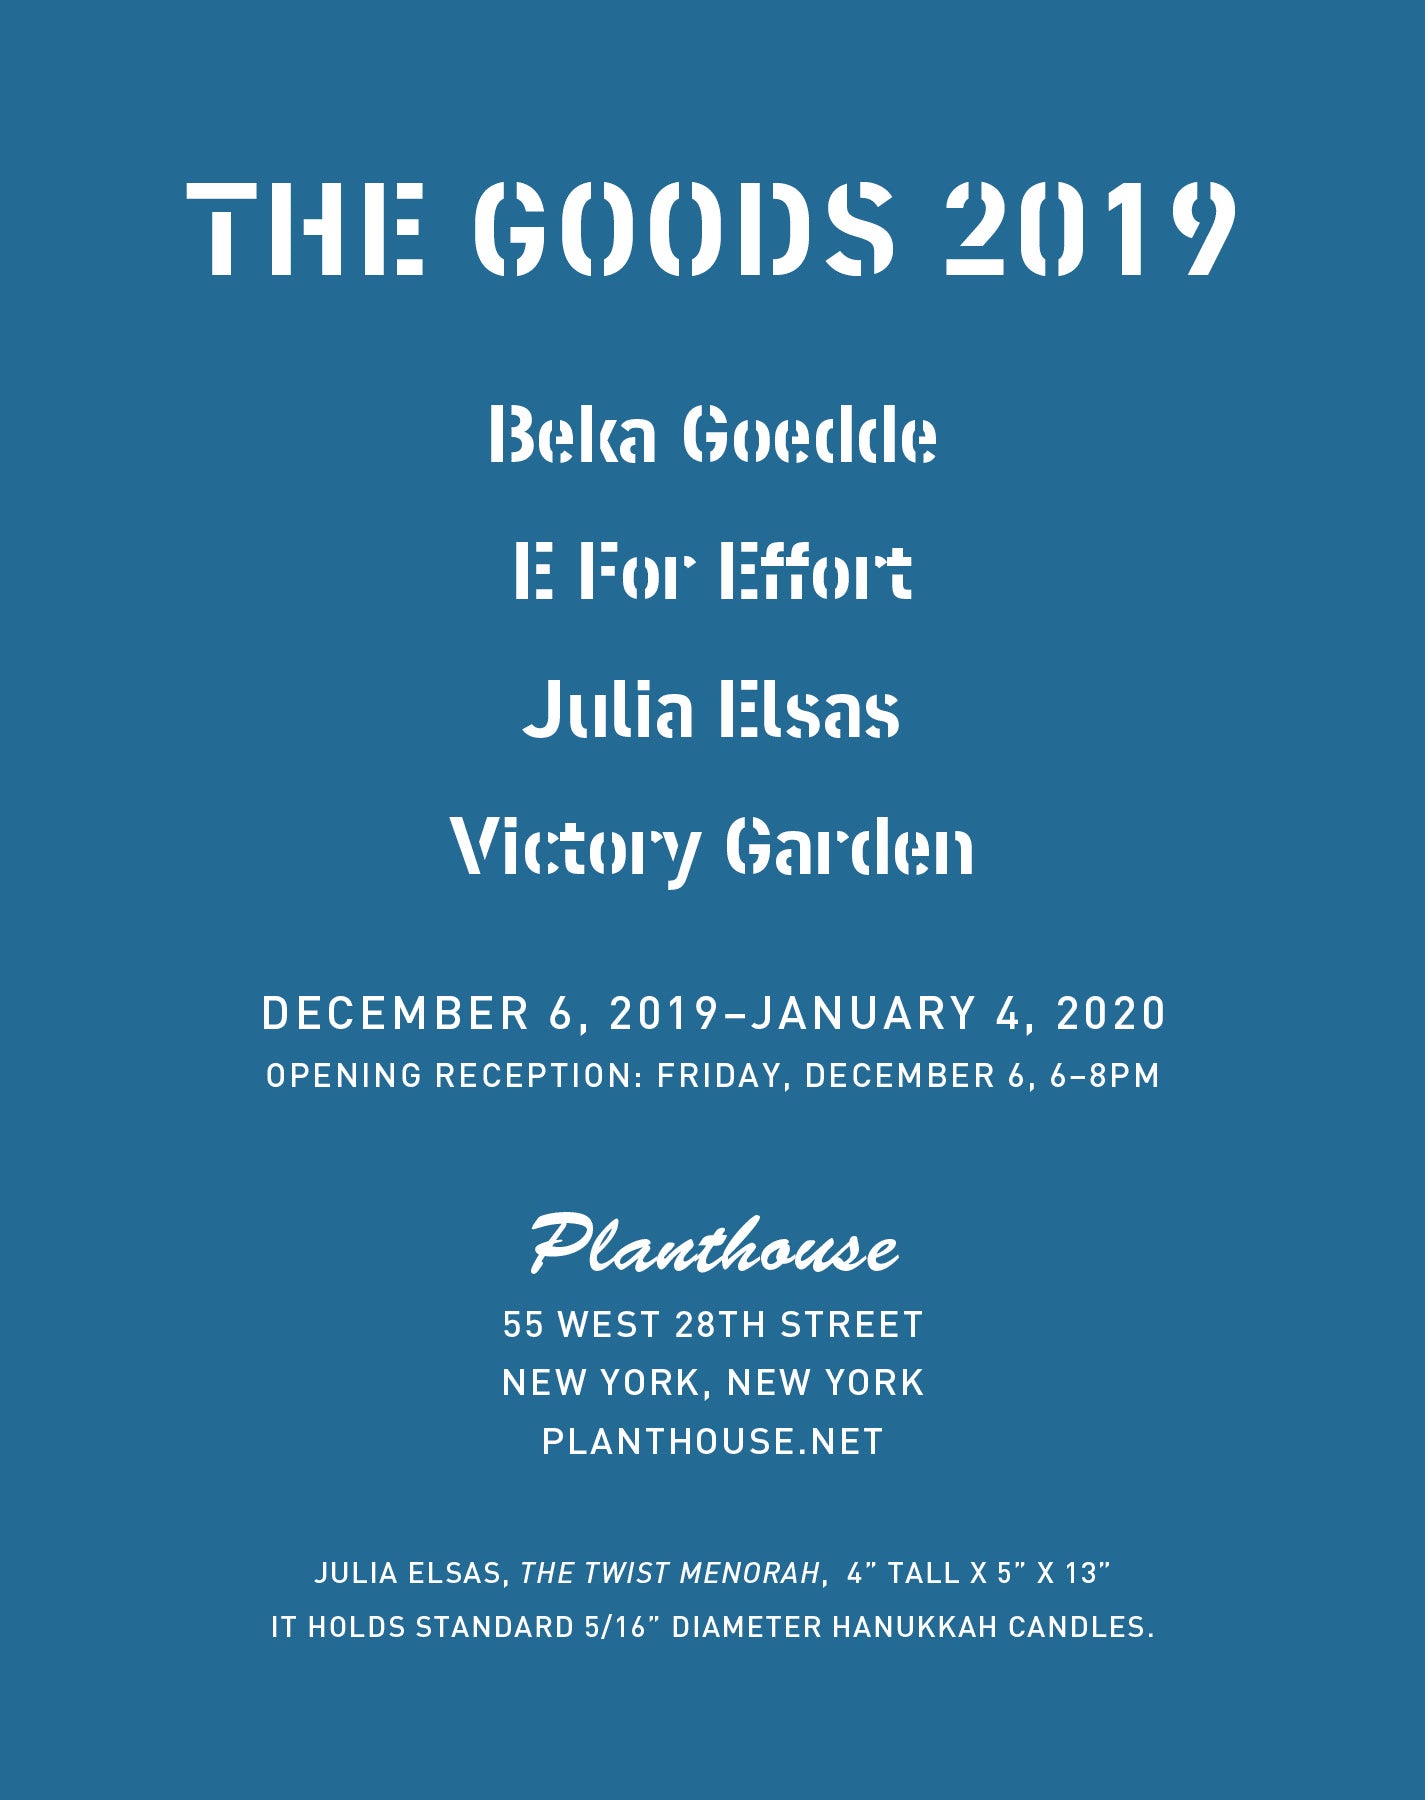 The Goods 2019